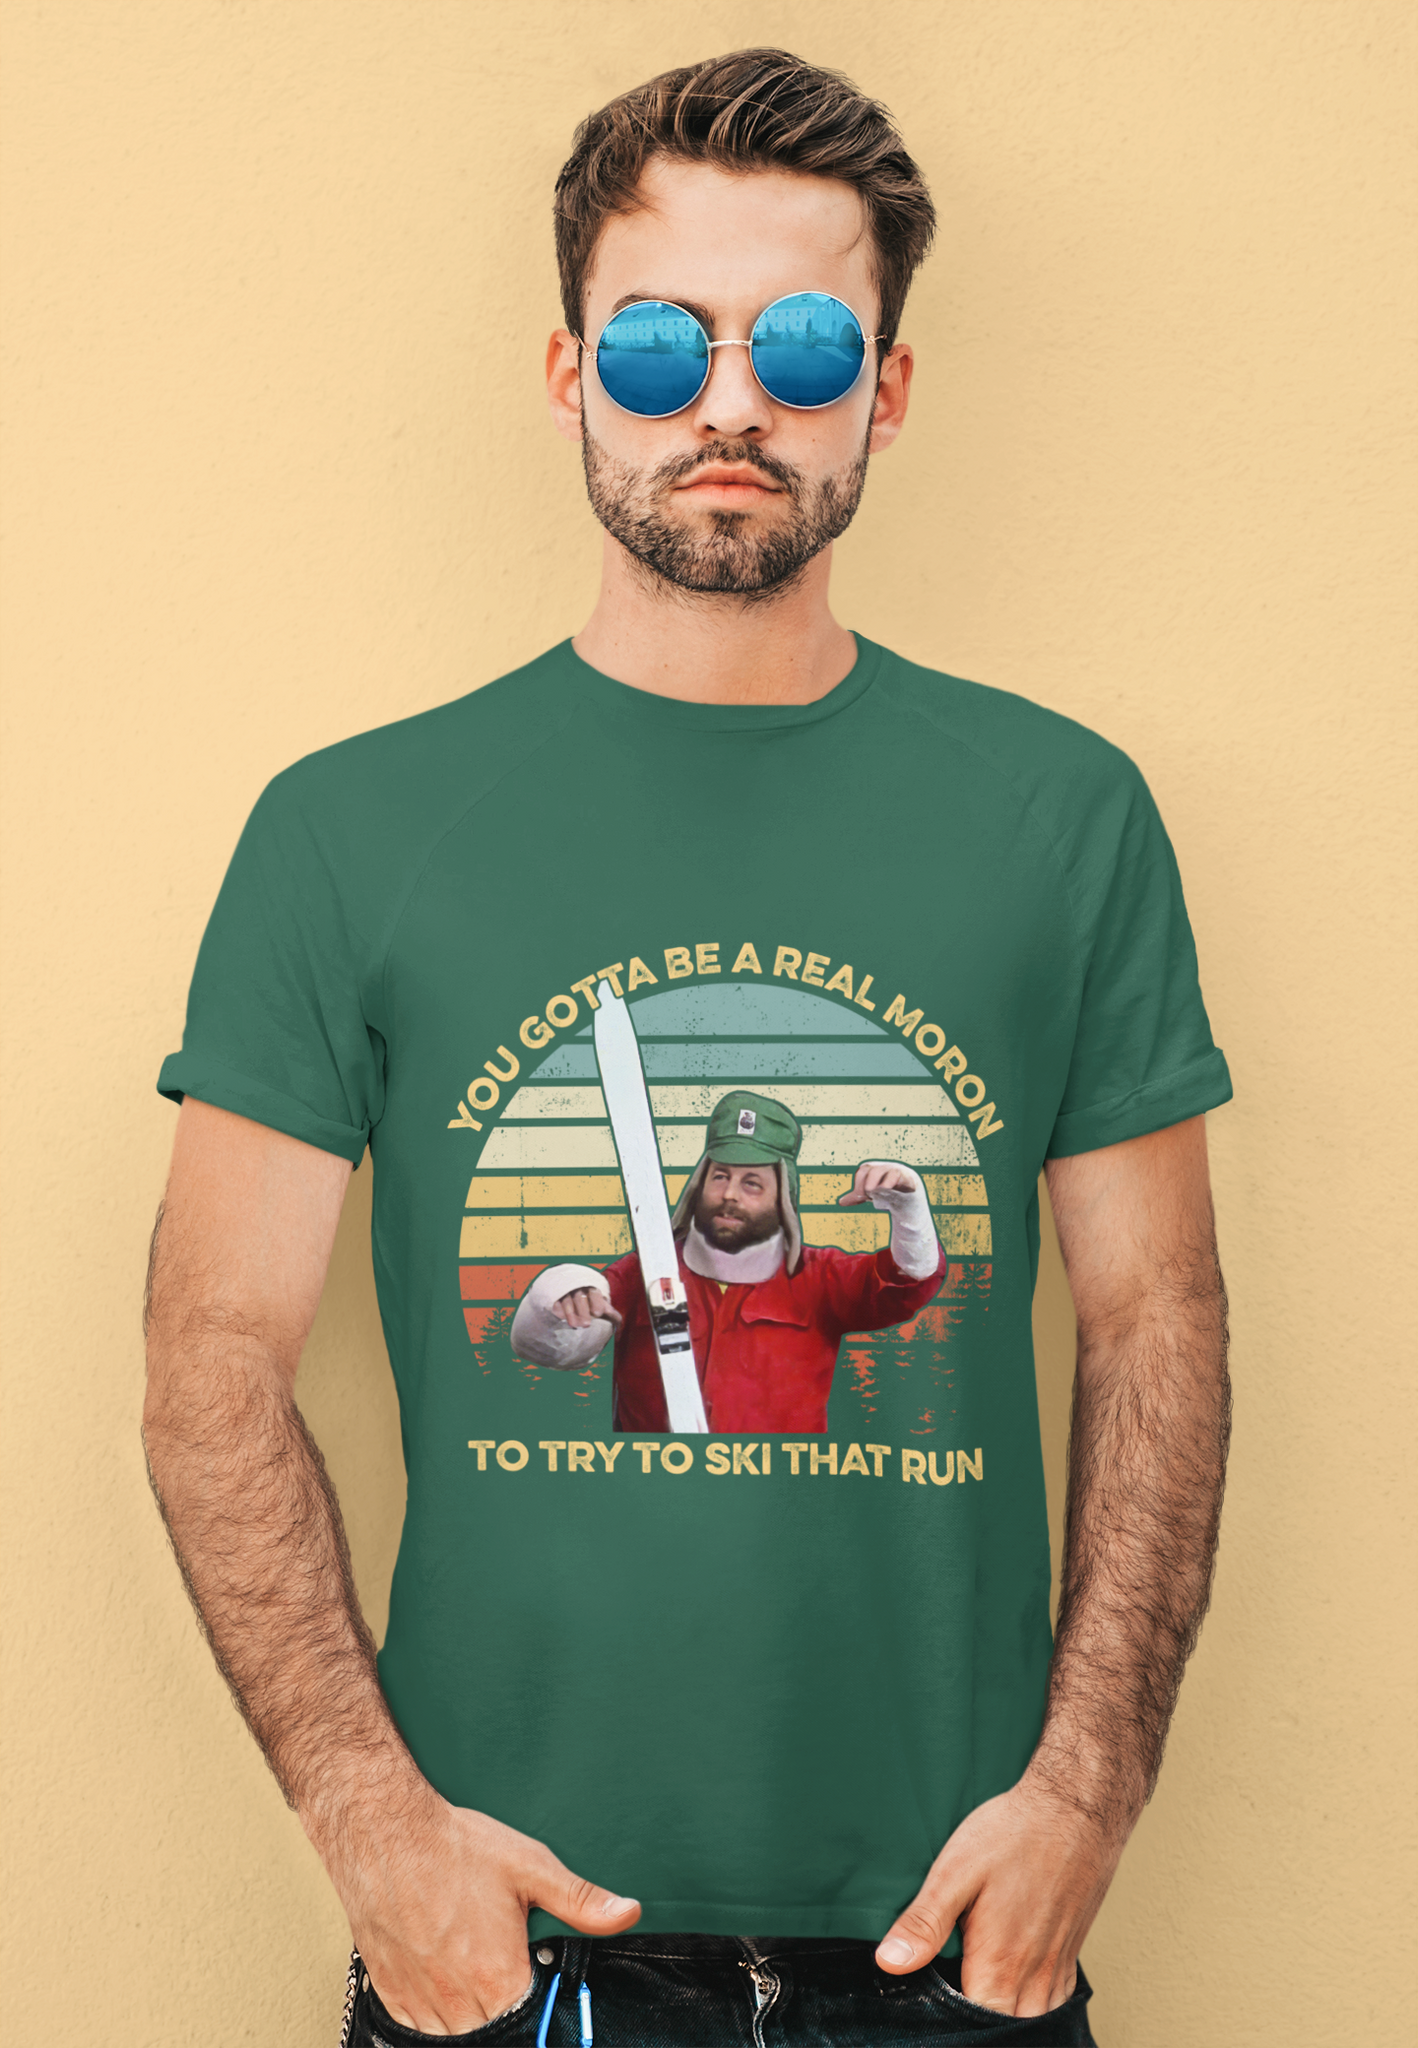 Better Off Dead Vintage T Shirt, You Gotta Be A Real Moron To Try To Ski That Run Tshirt